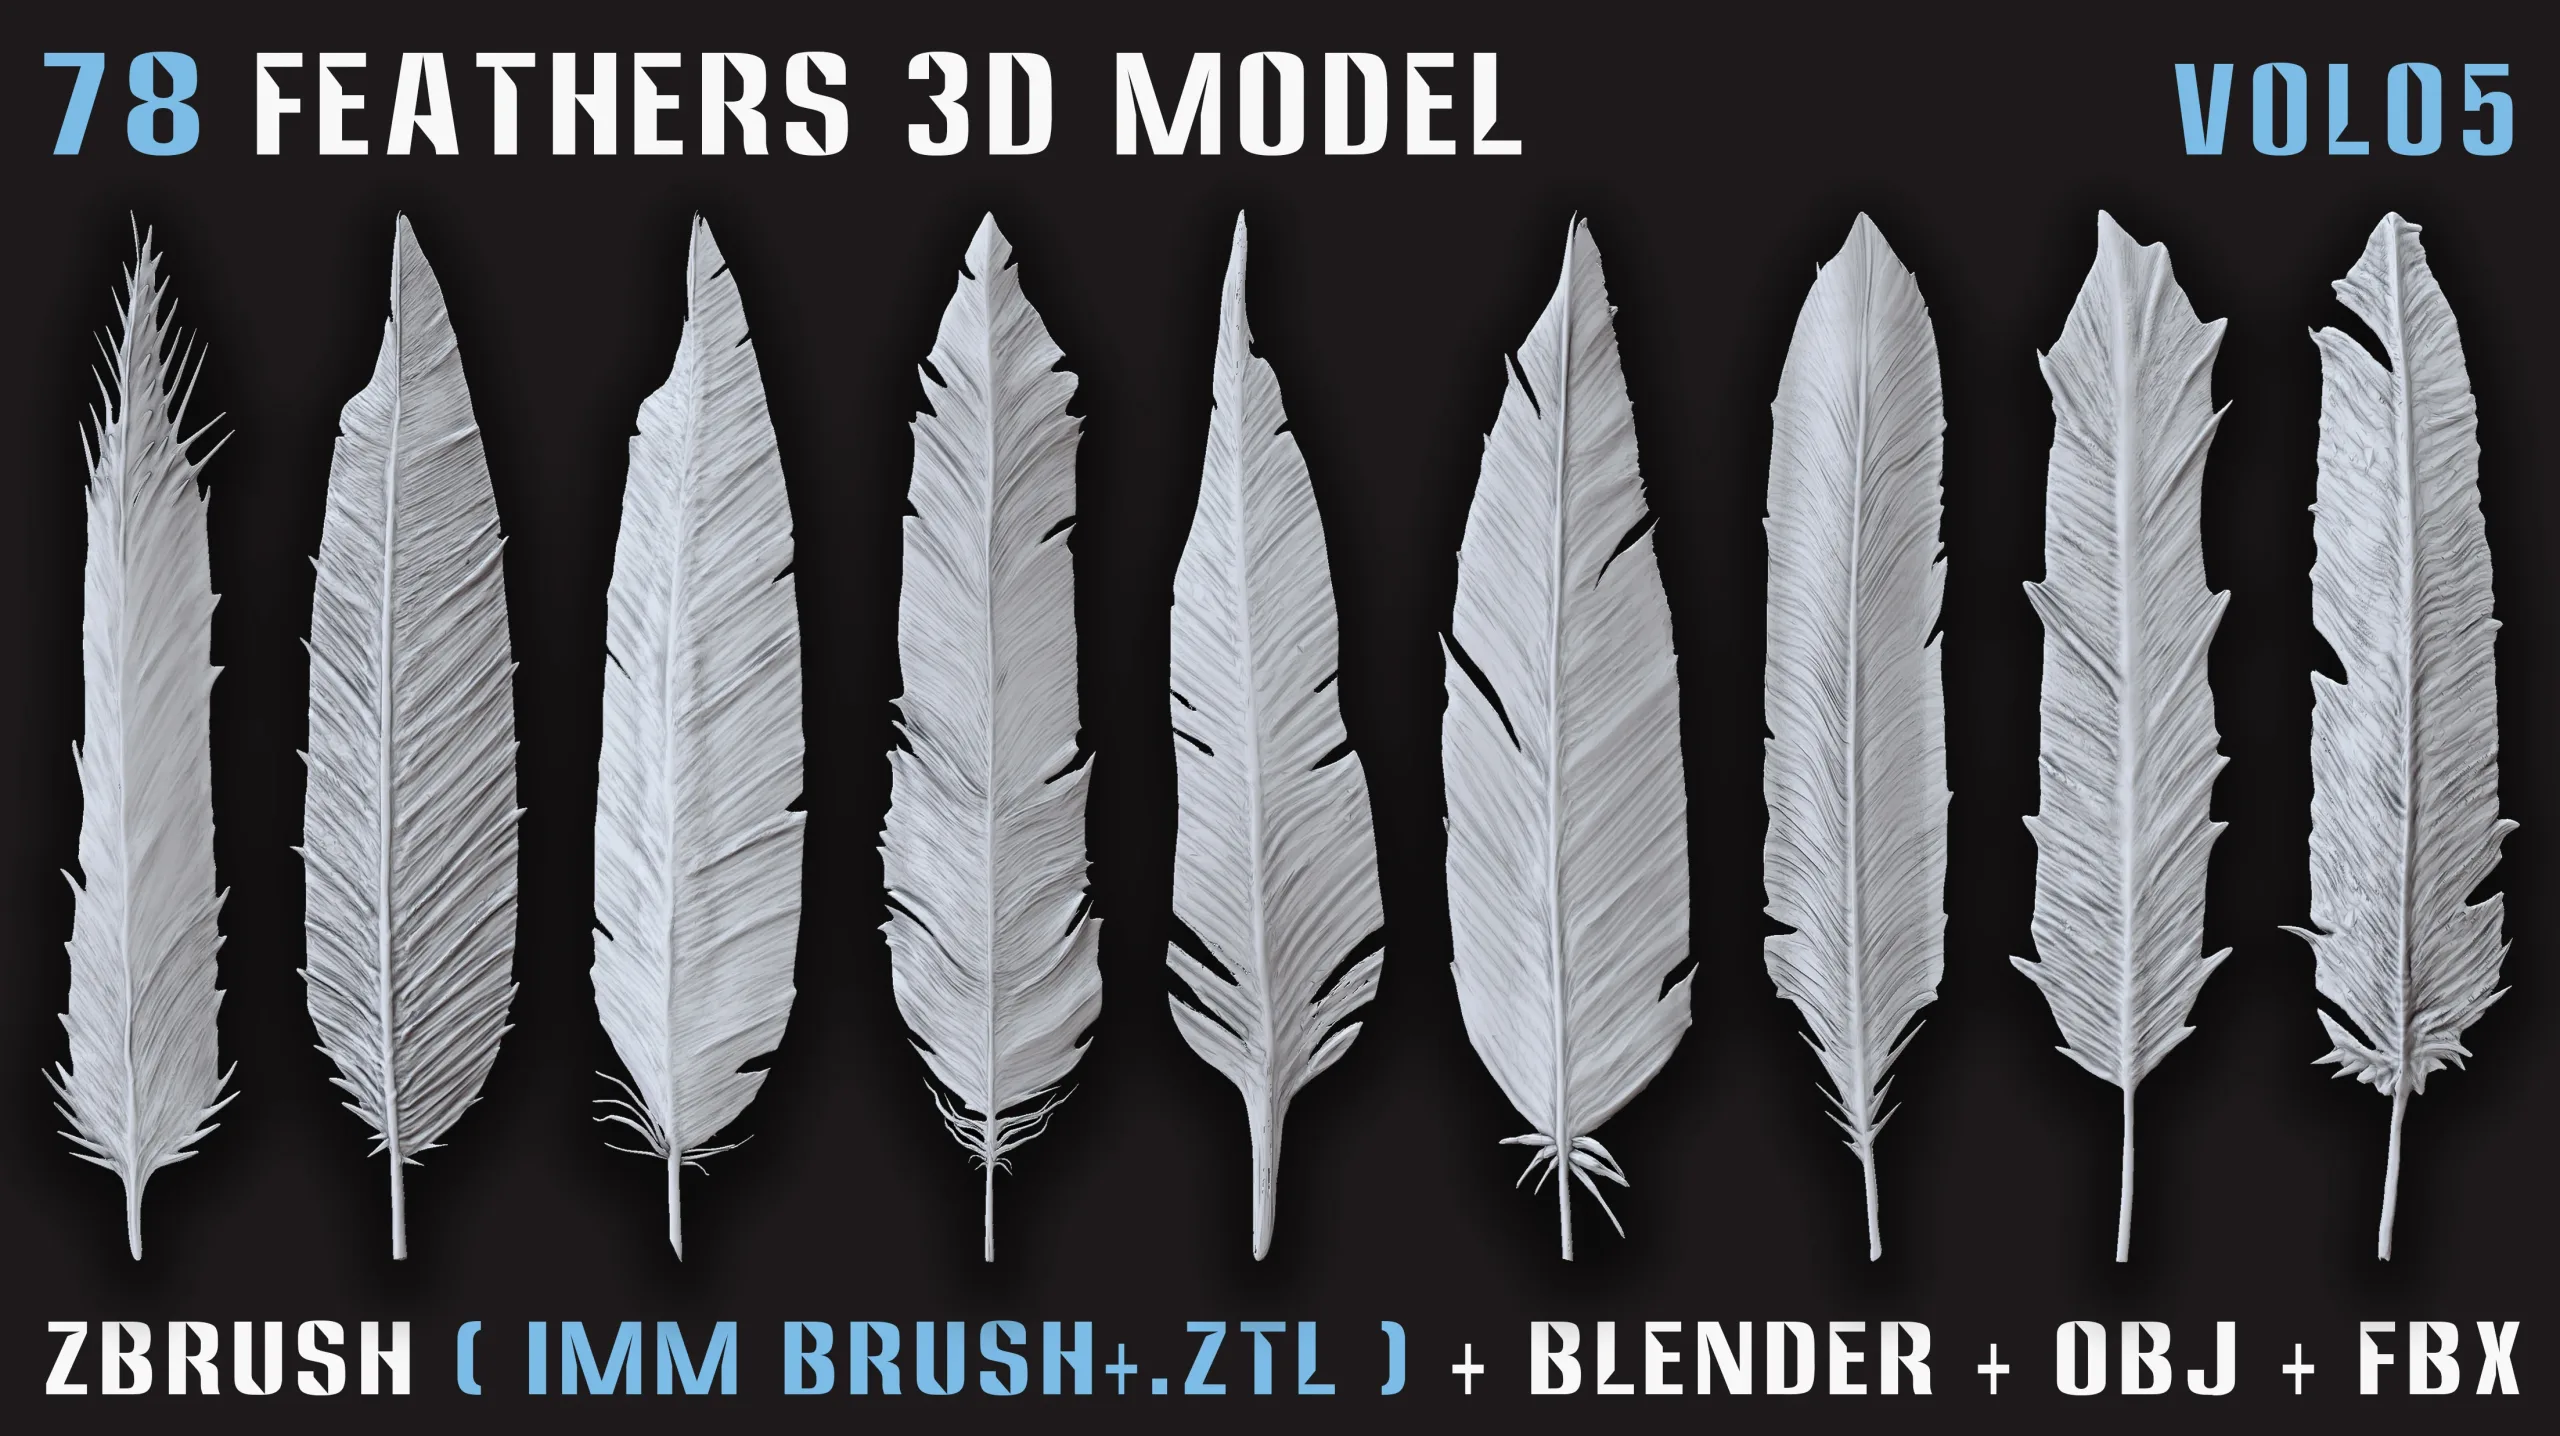 78 Feathers 3D Model (High, Mid, and Low Poly) – Vol.05